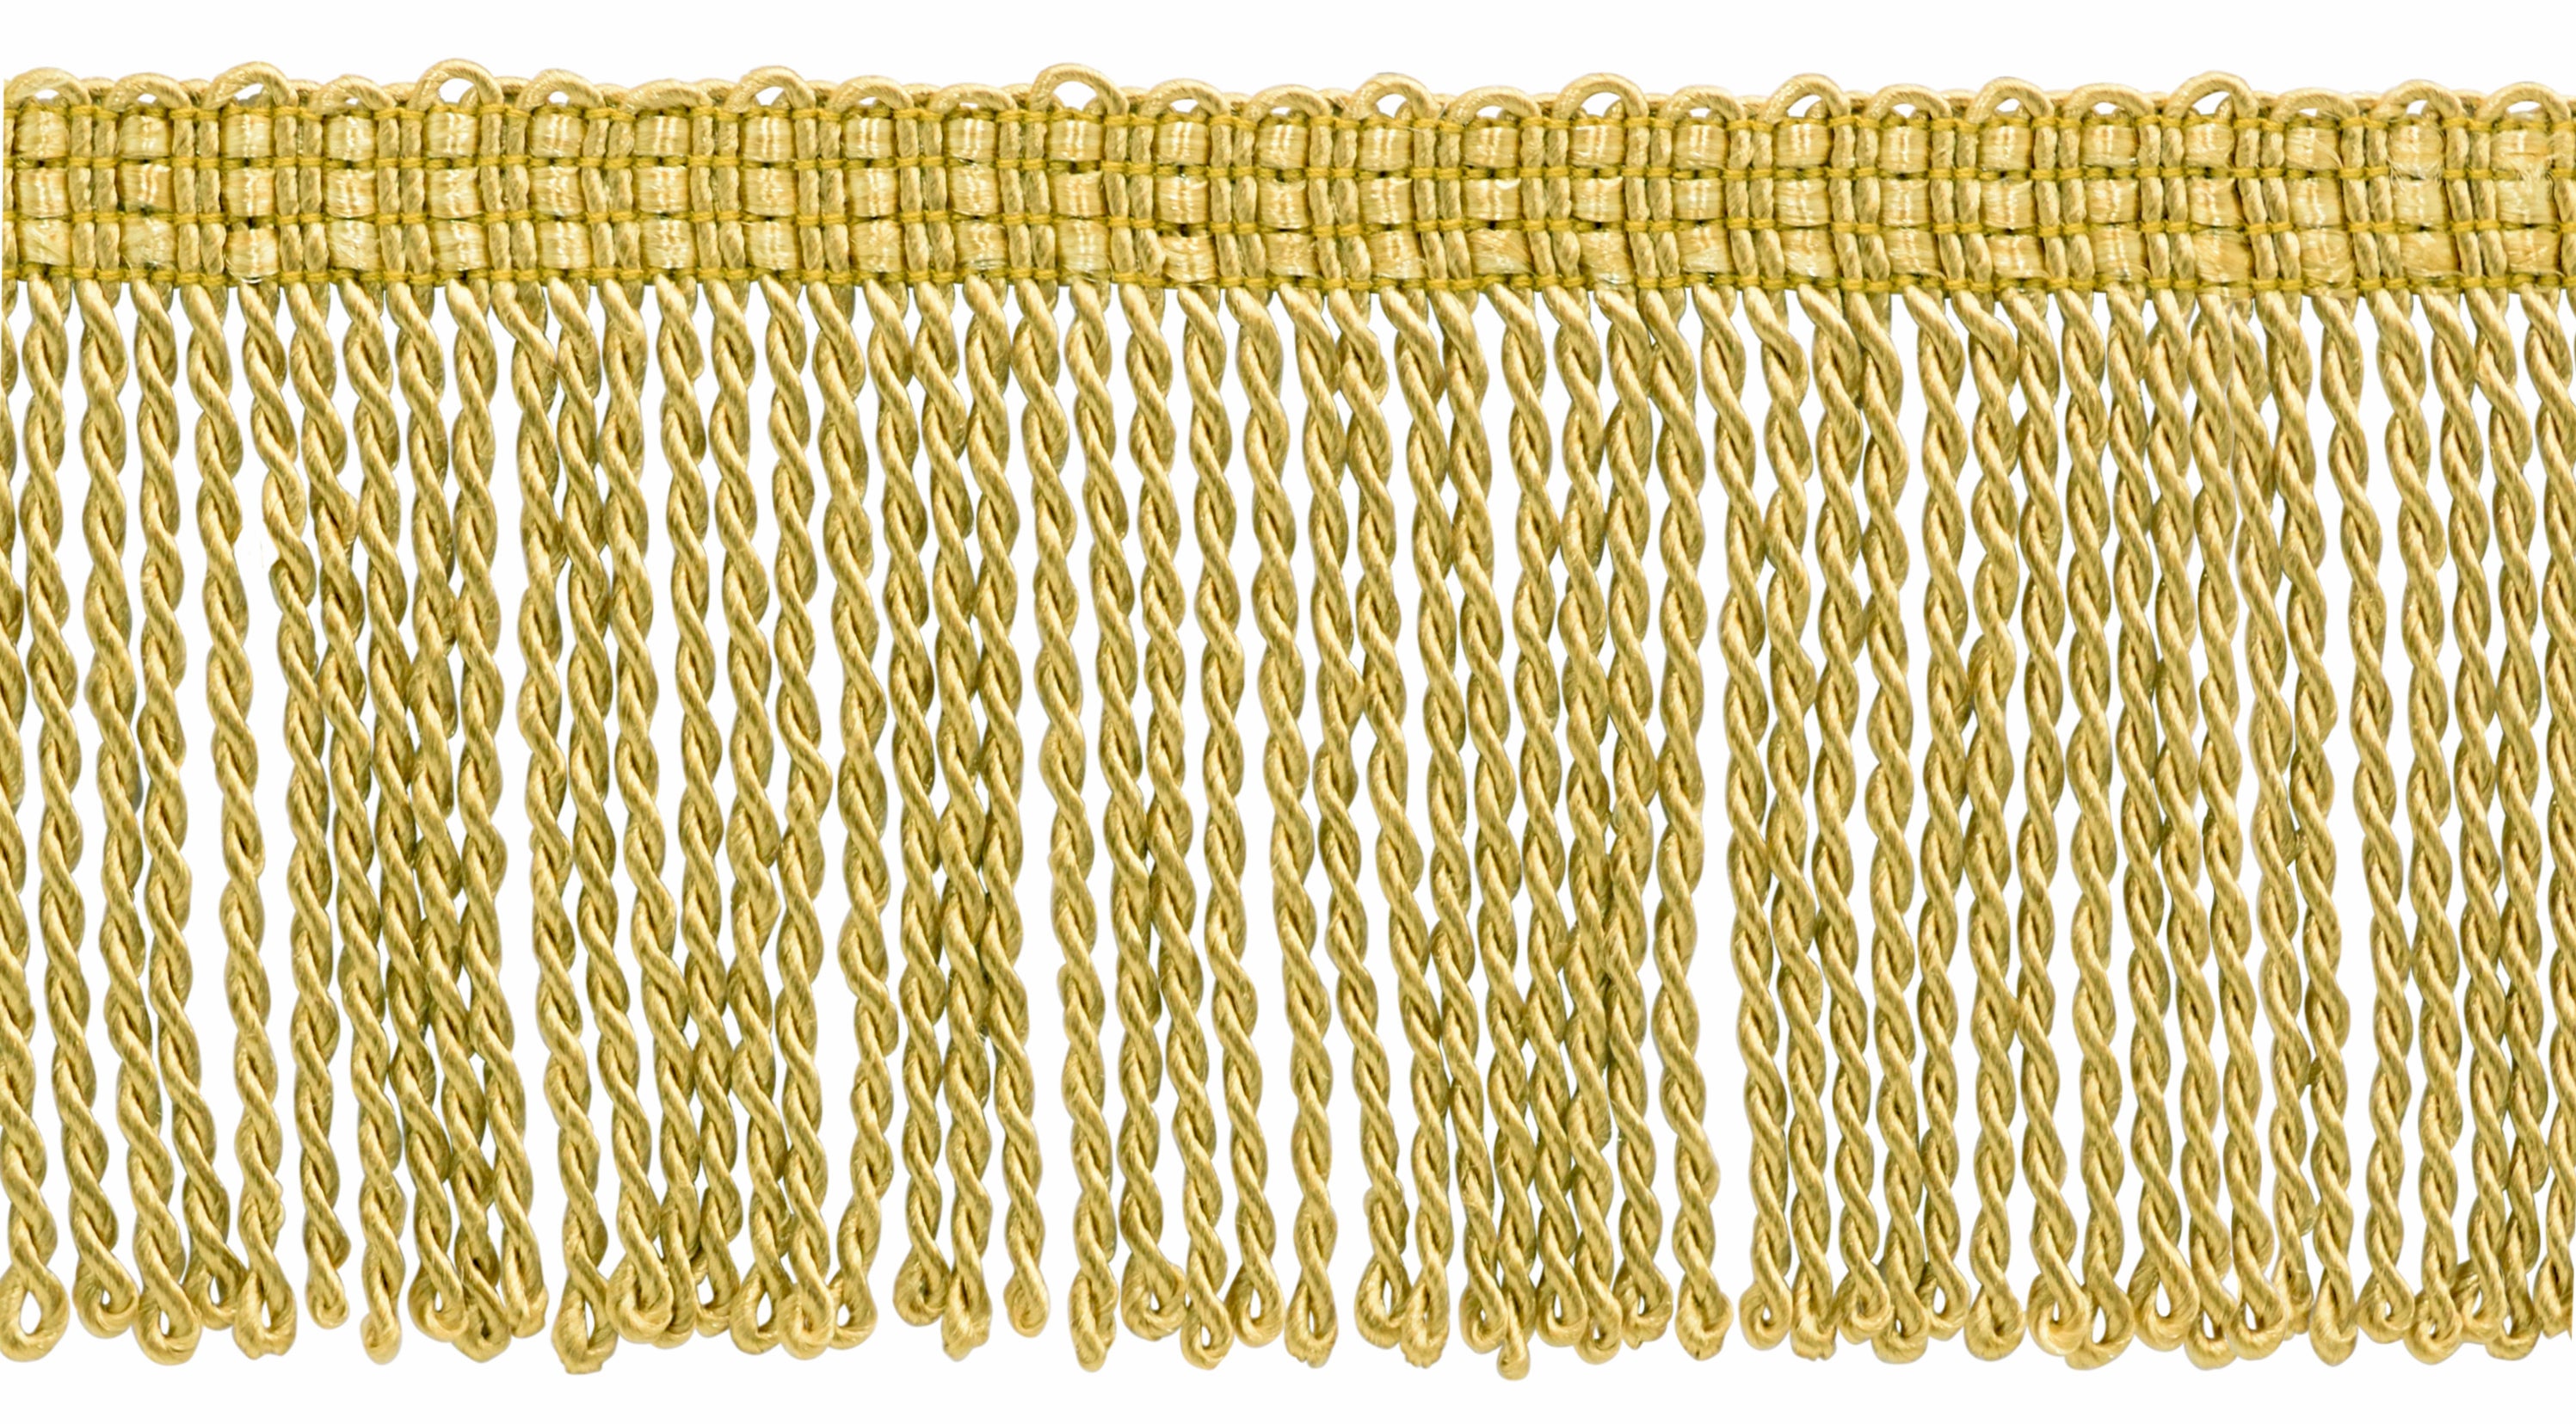 3 inch Long Antique Gold Thin Bullion Fringe Trim / Style#Bft3 / Color: Gold - C4 / Sold by The Yard